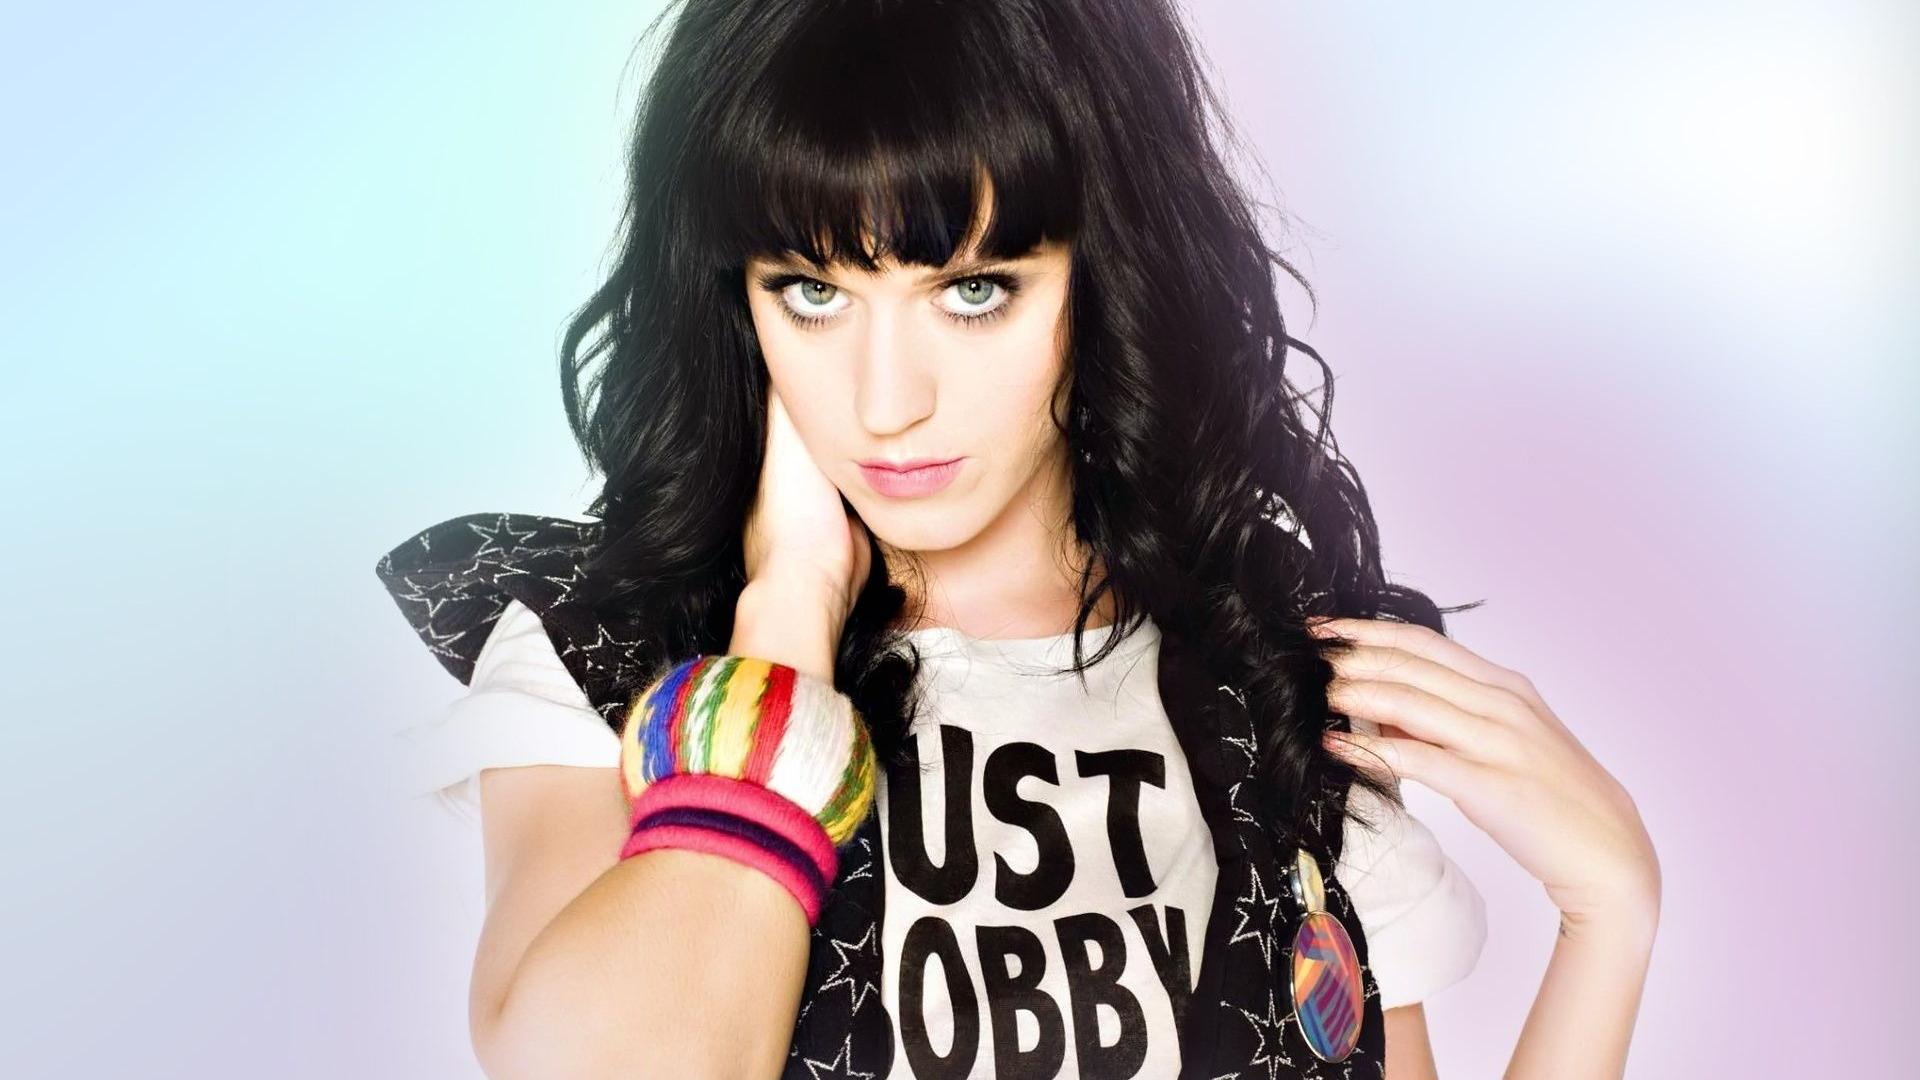 Katy Perry Background Desktop And Make This Wallpaper For Your